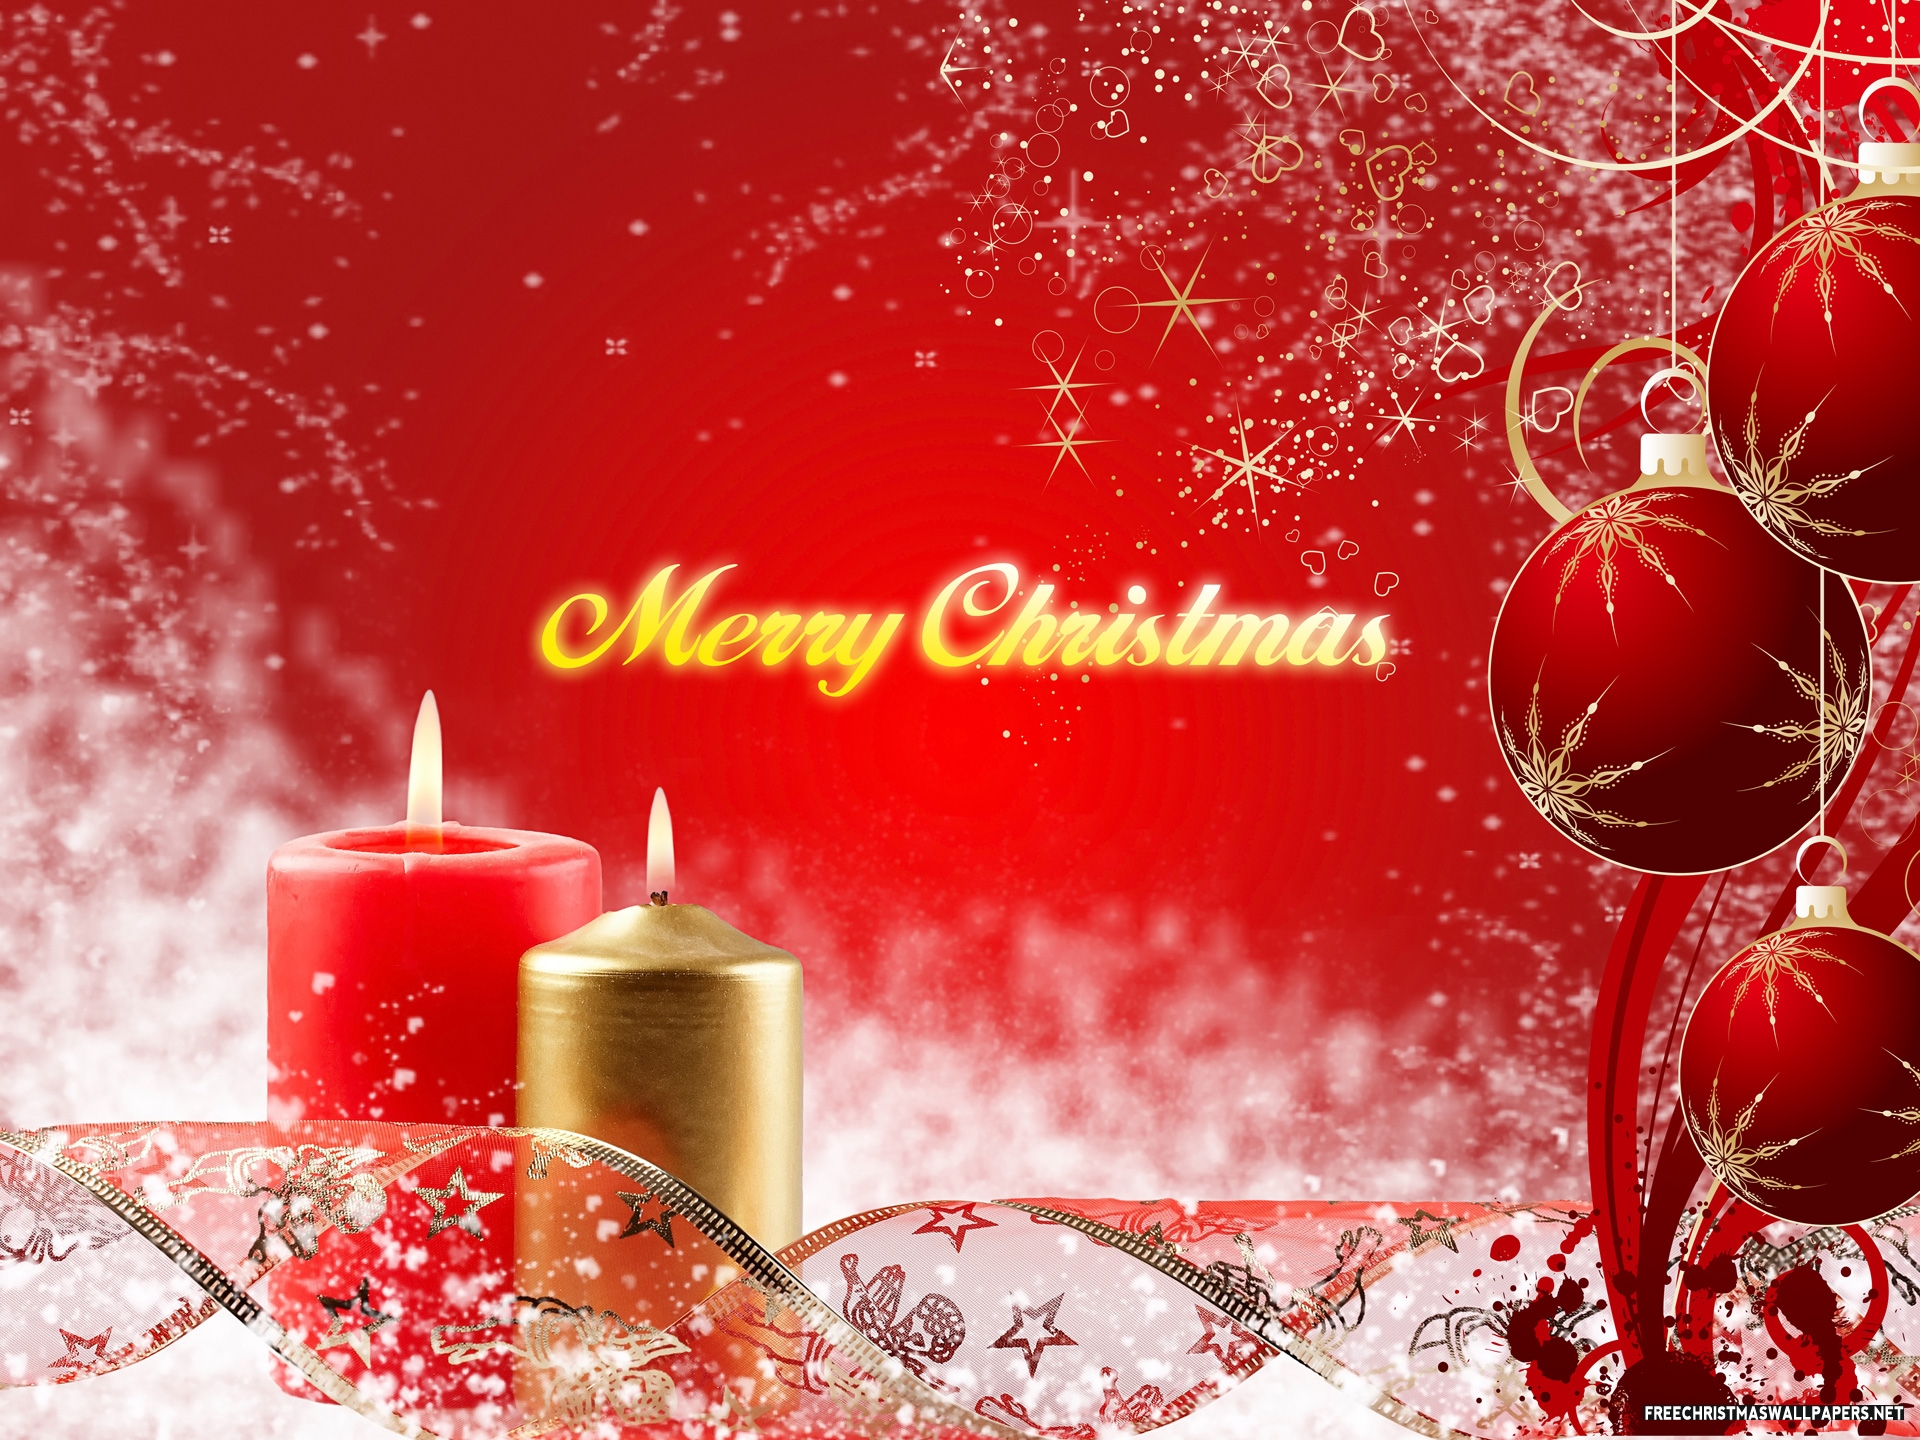 Merry Christmas and Happy New Year! Sweet Careers Consulting